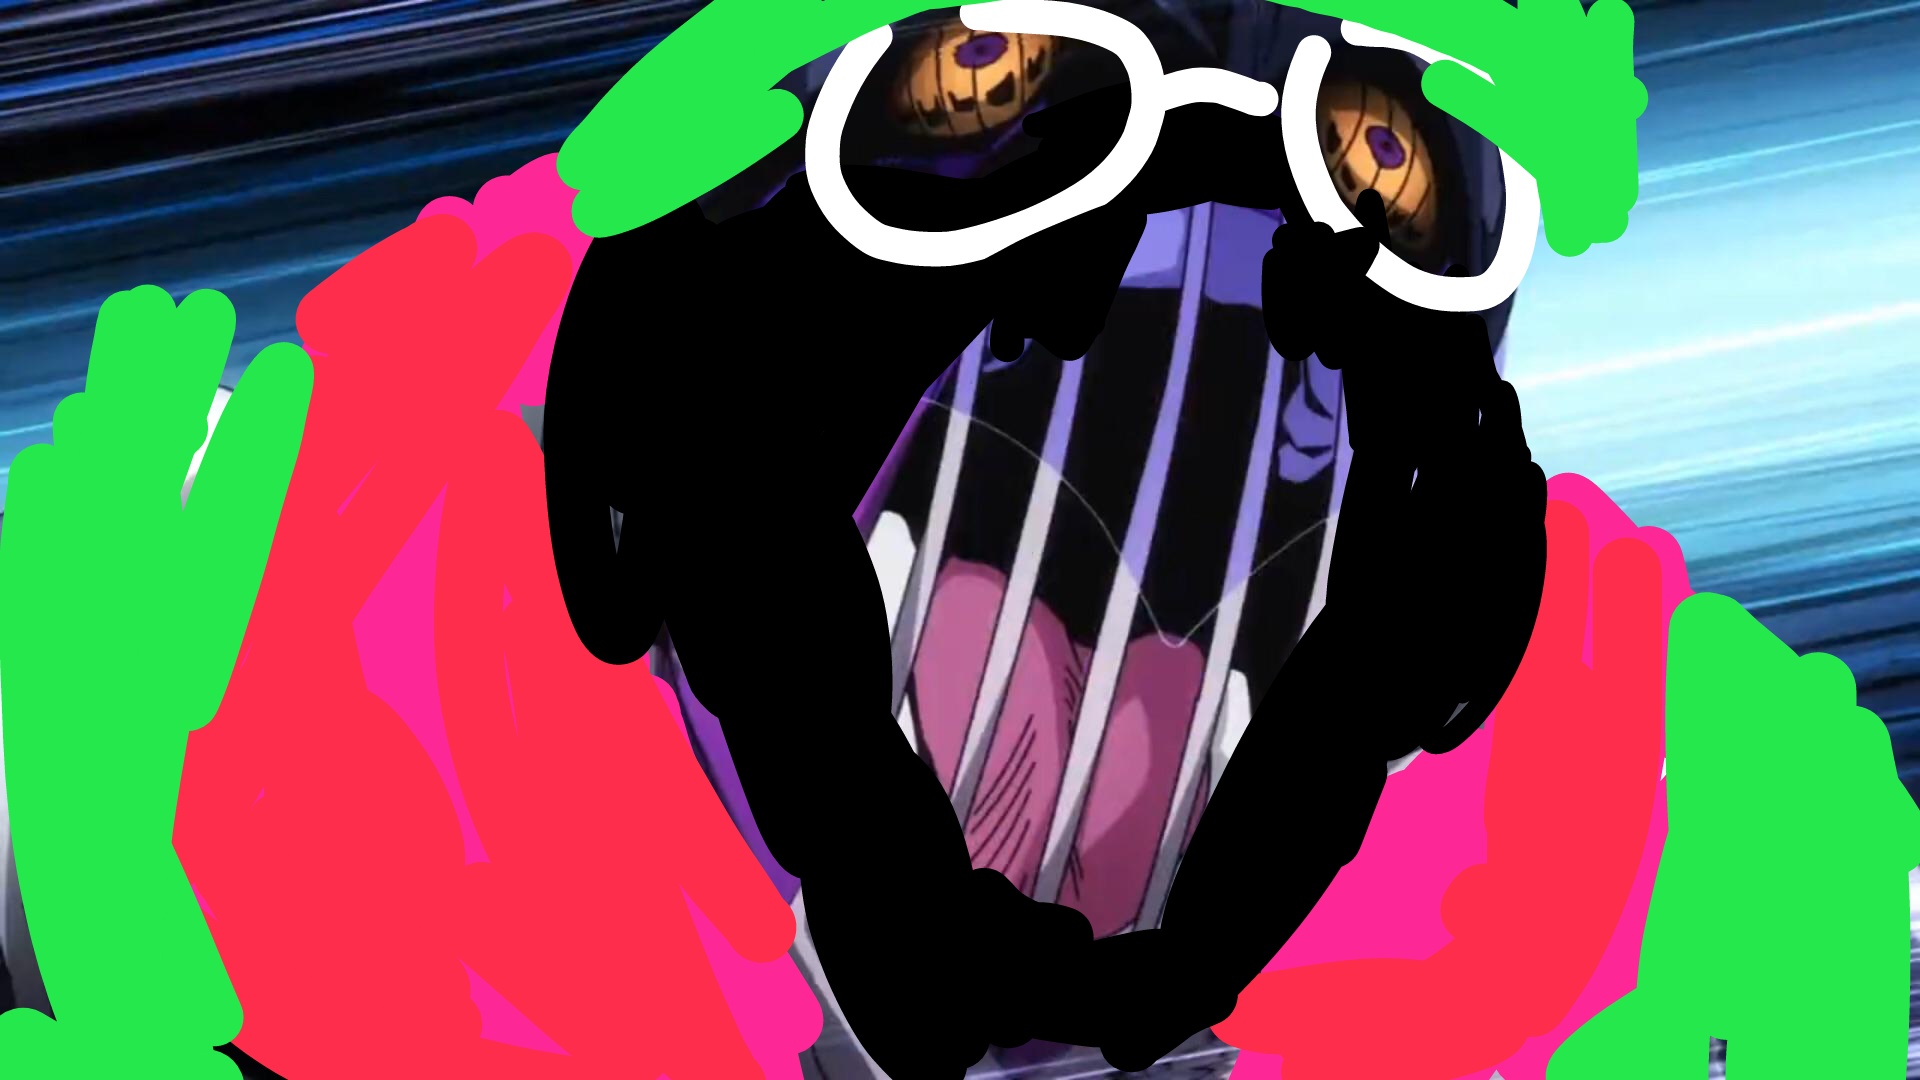 Ralsei After Seeing Some Questionable Image Deltarune